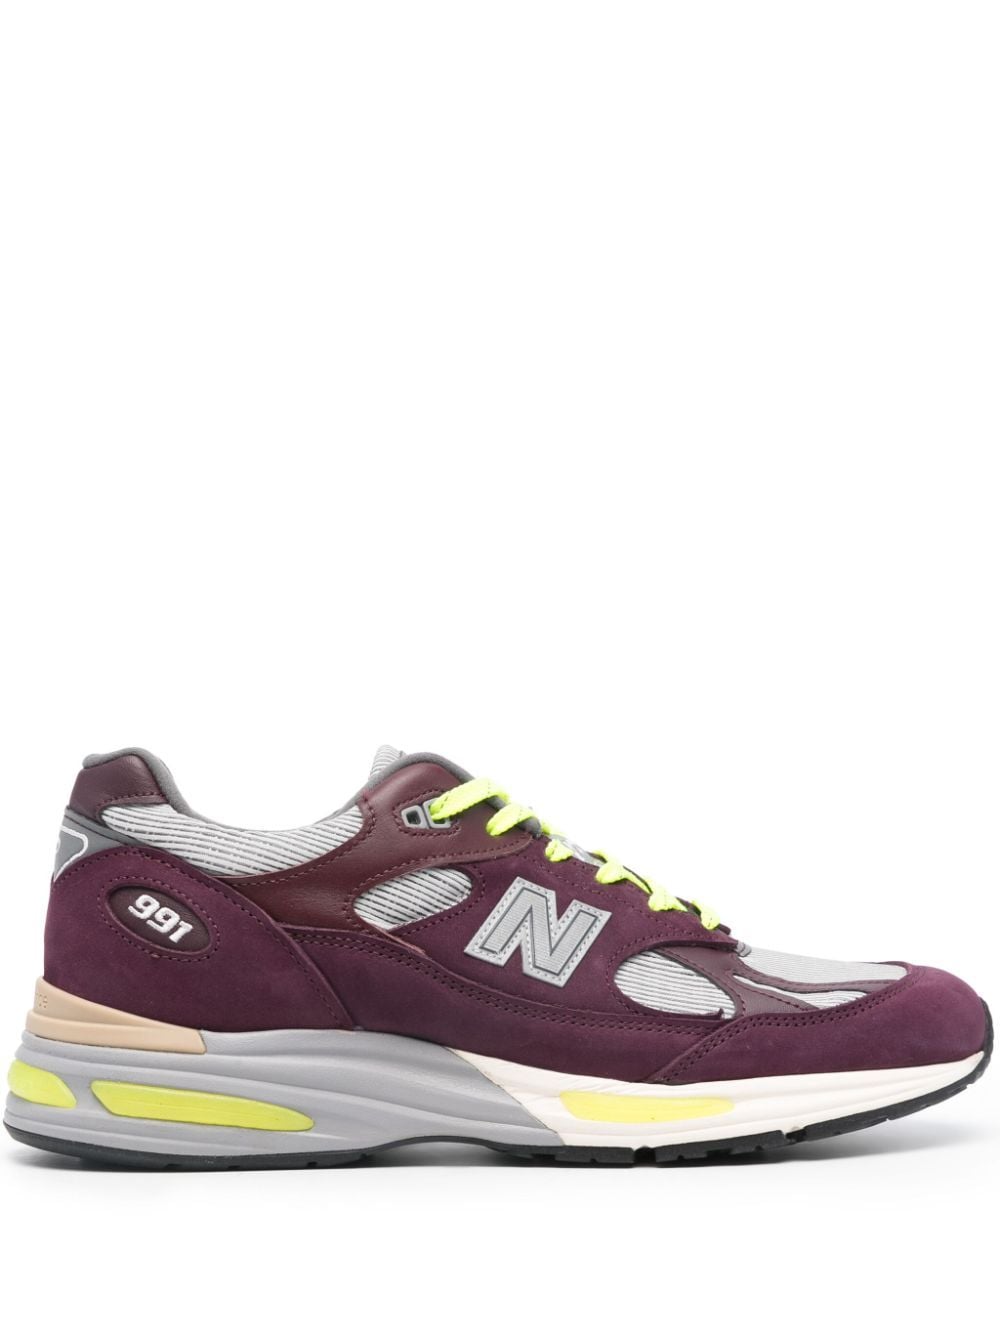 New Balance x Patta 991v2 lace-up sneakers - BURGUNDY/SILVER